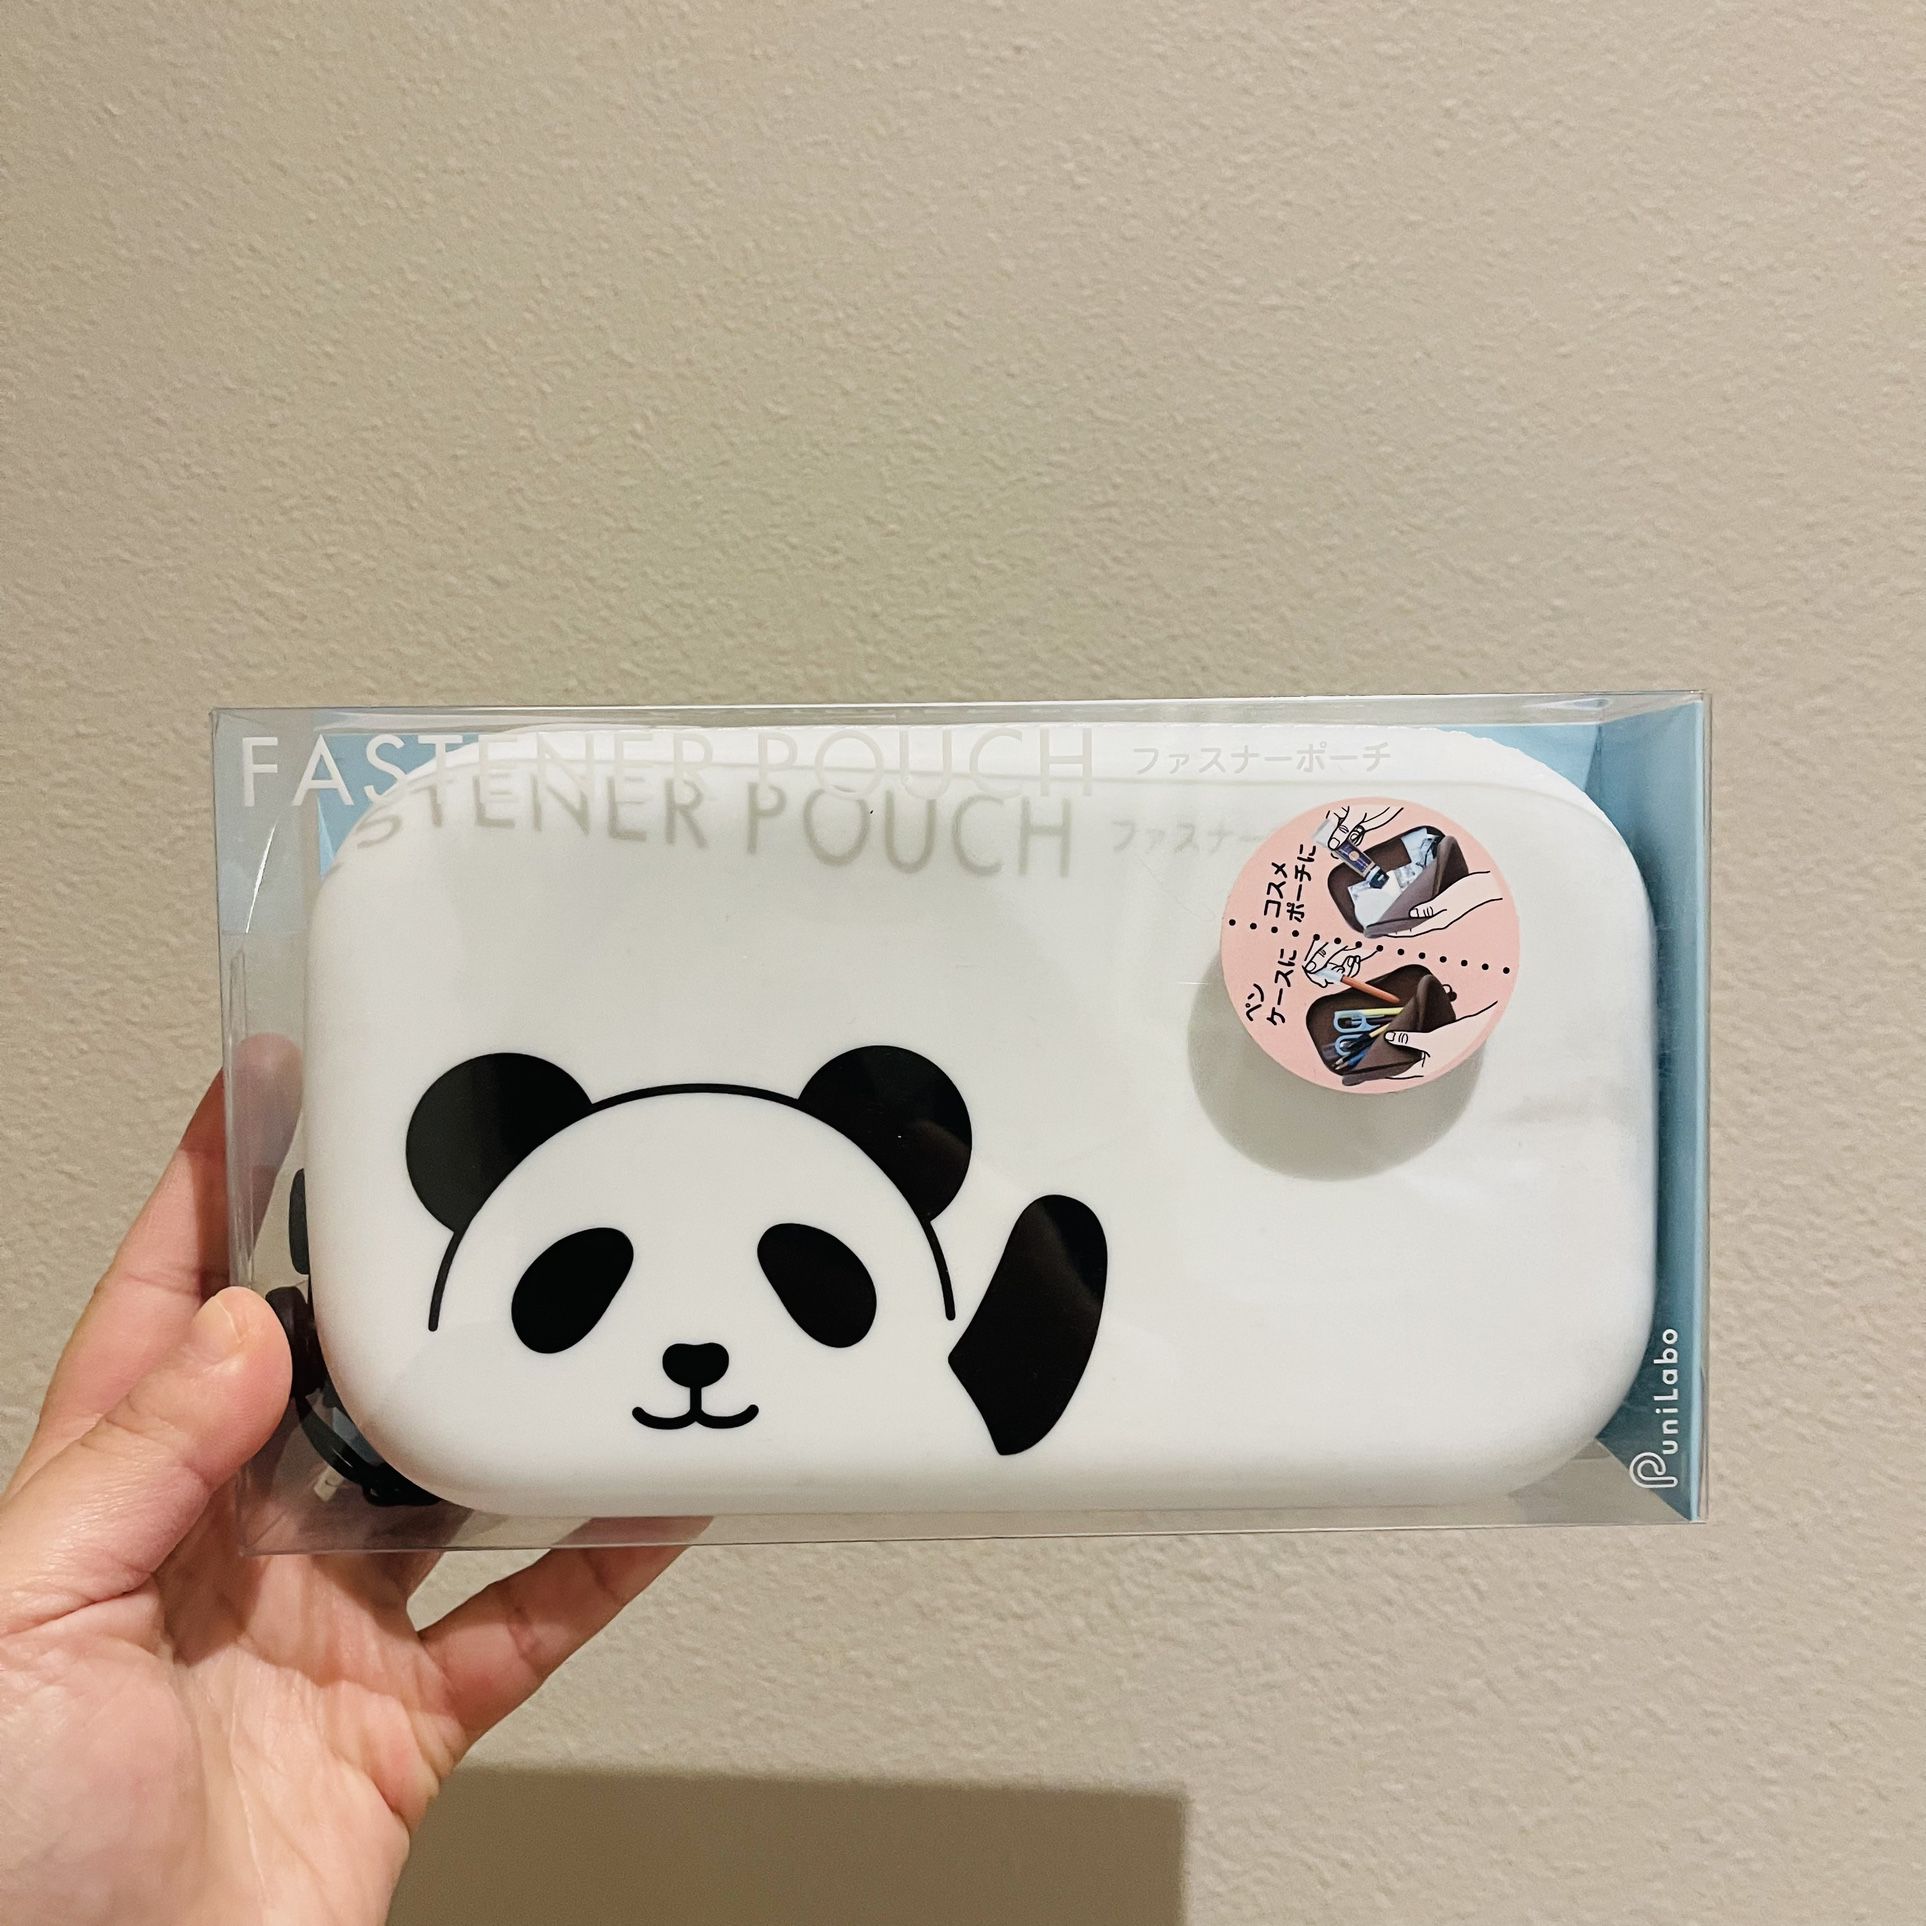 Cute Stationery Pouch from Japan